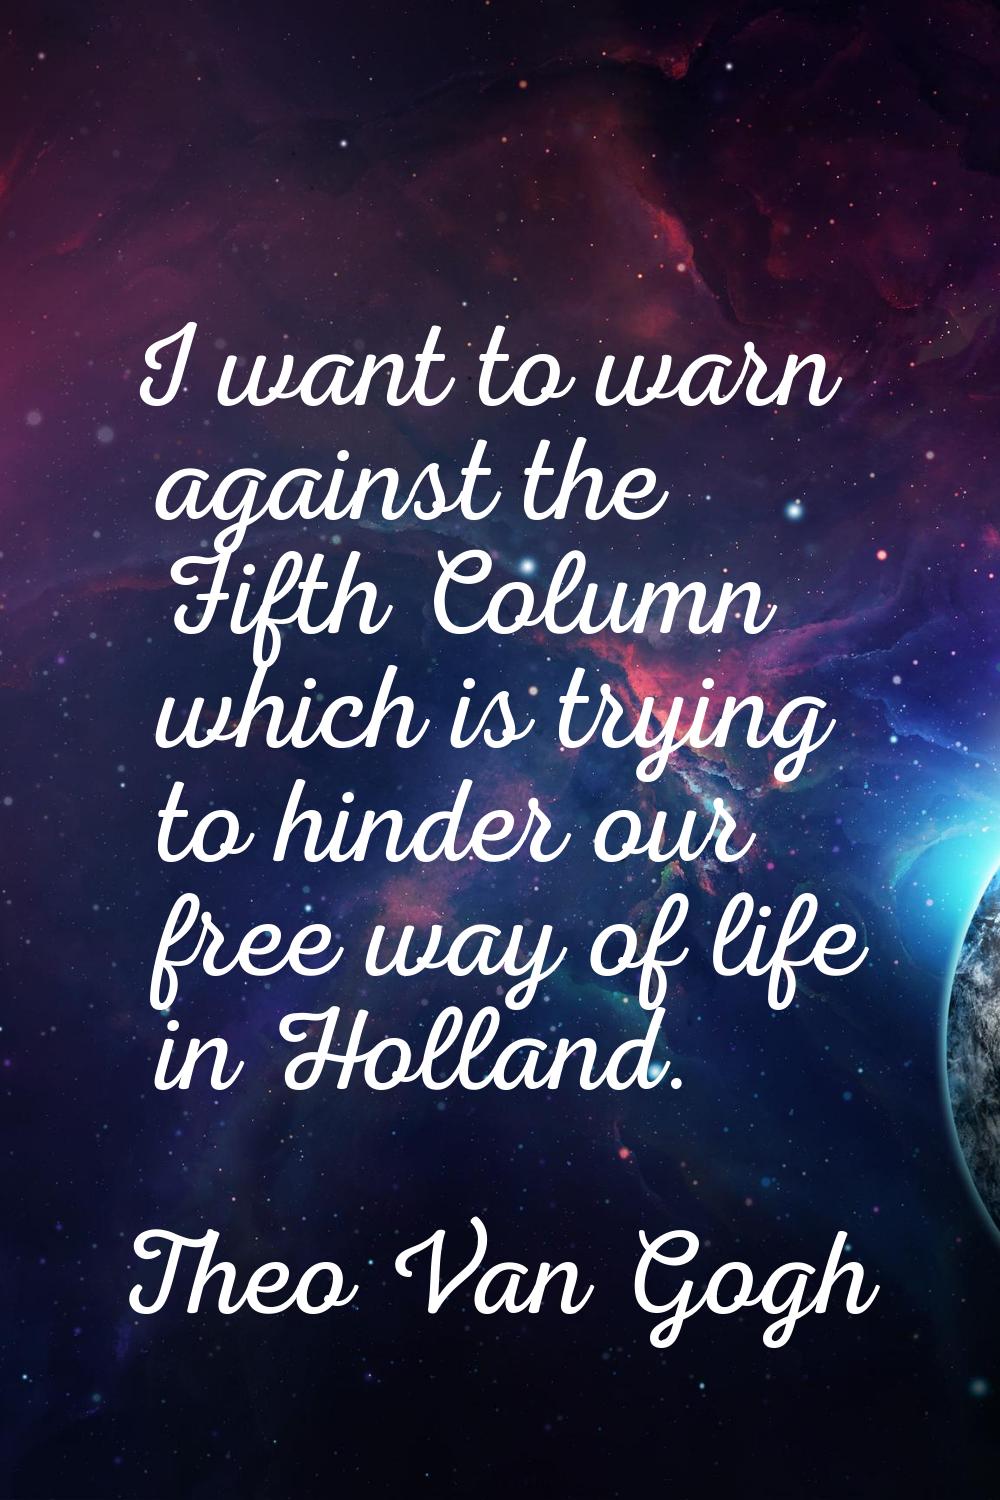 I want to warn against the Fifth Column which is trying to hinder our free way of life in Holland.